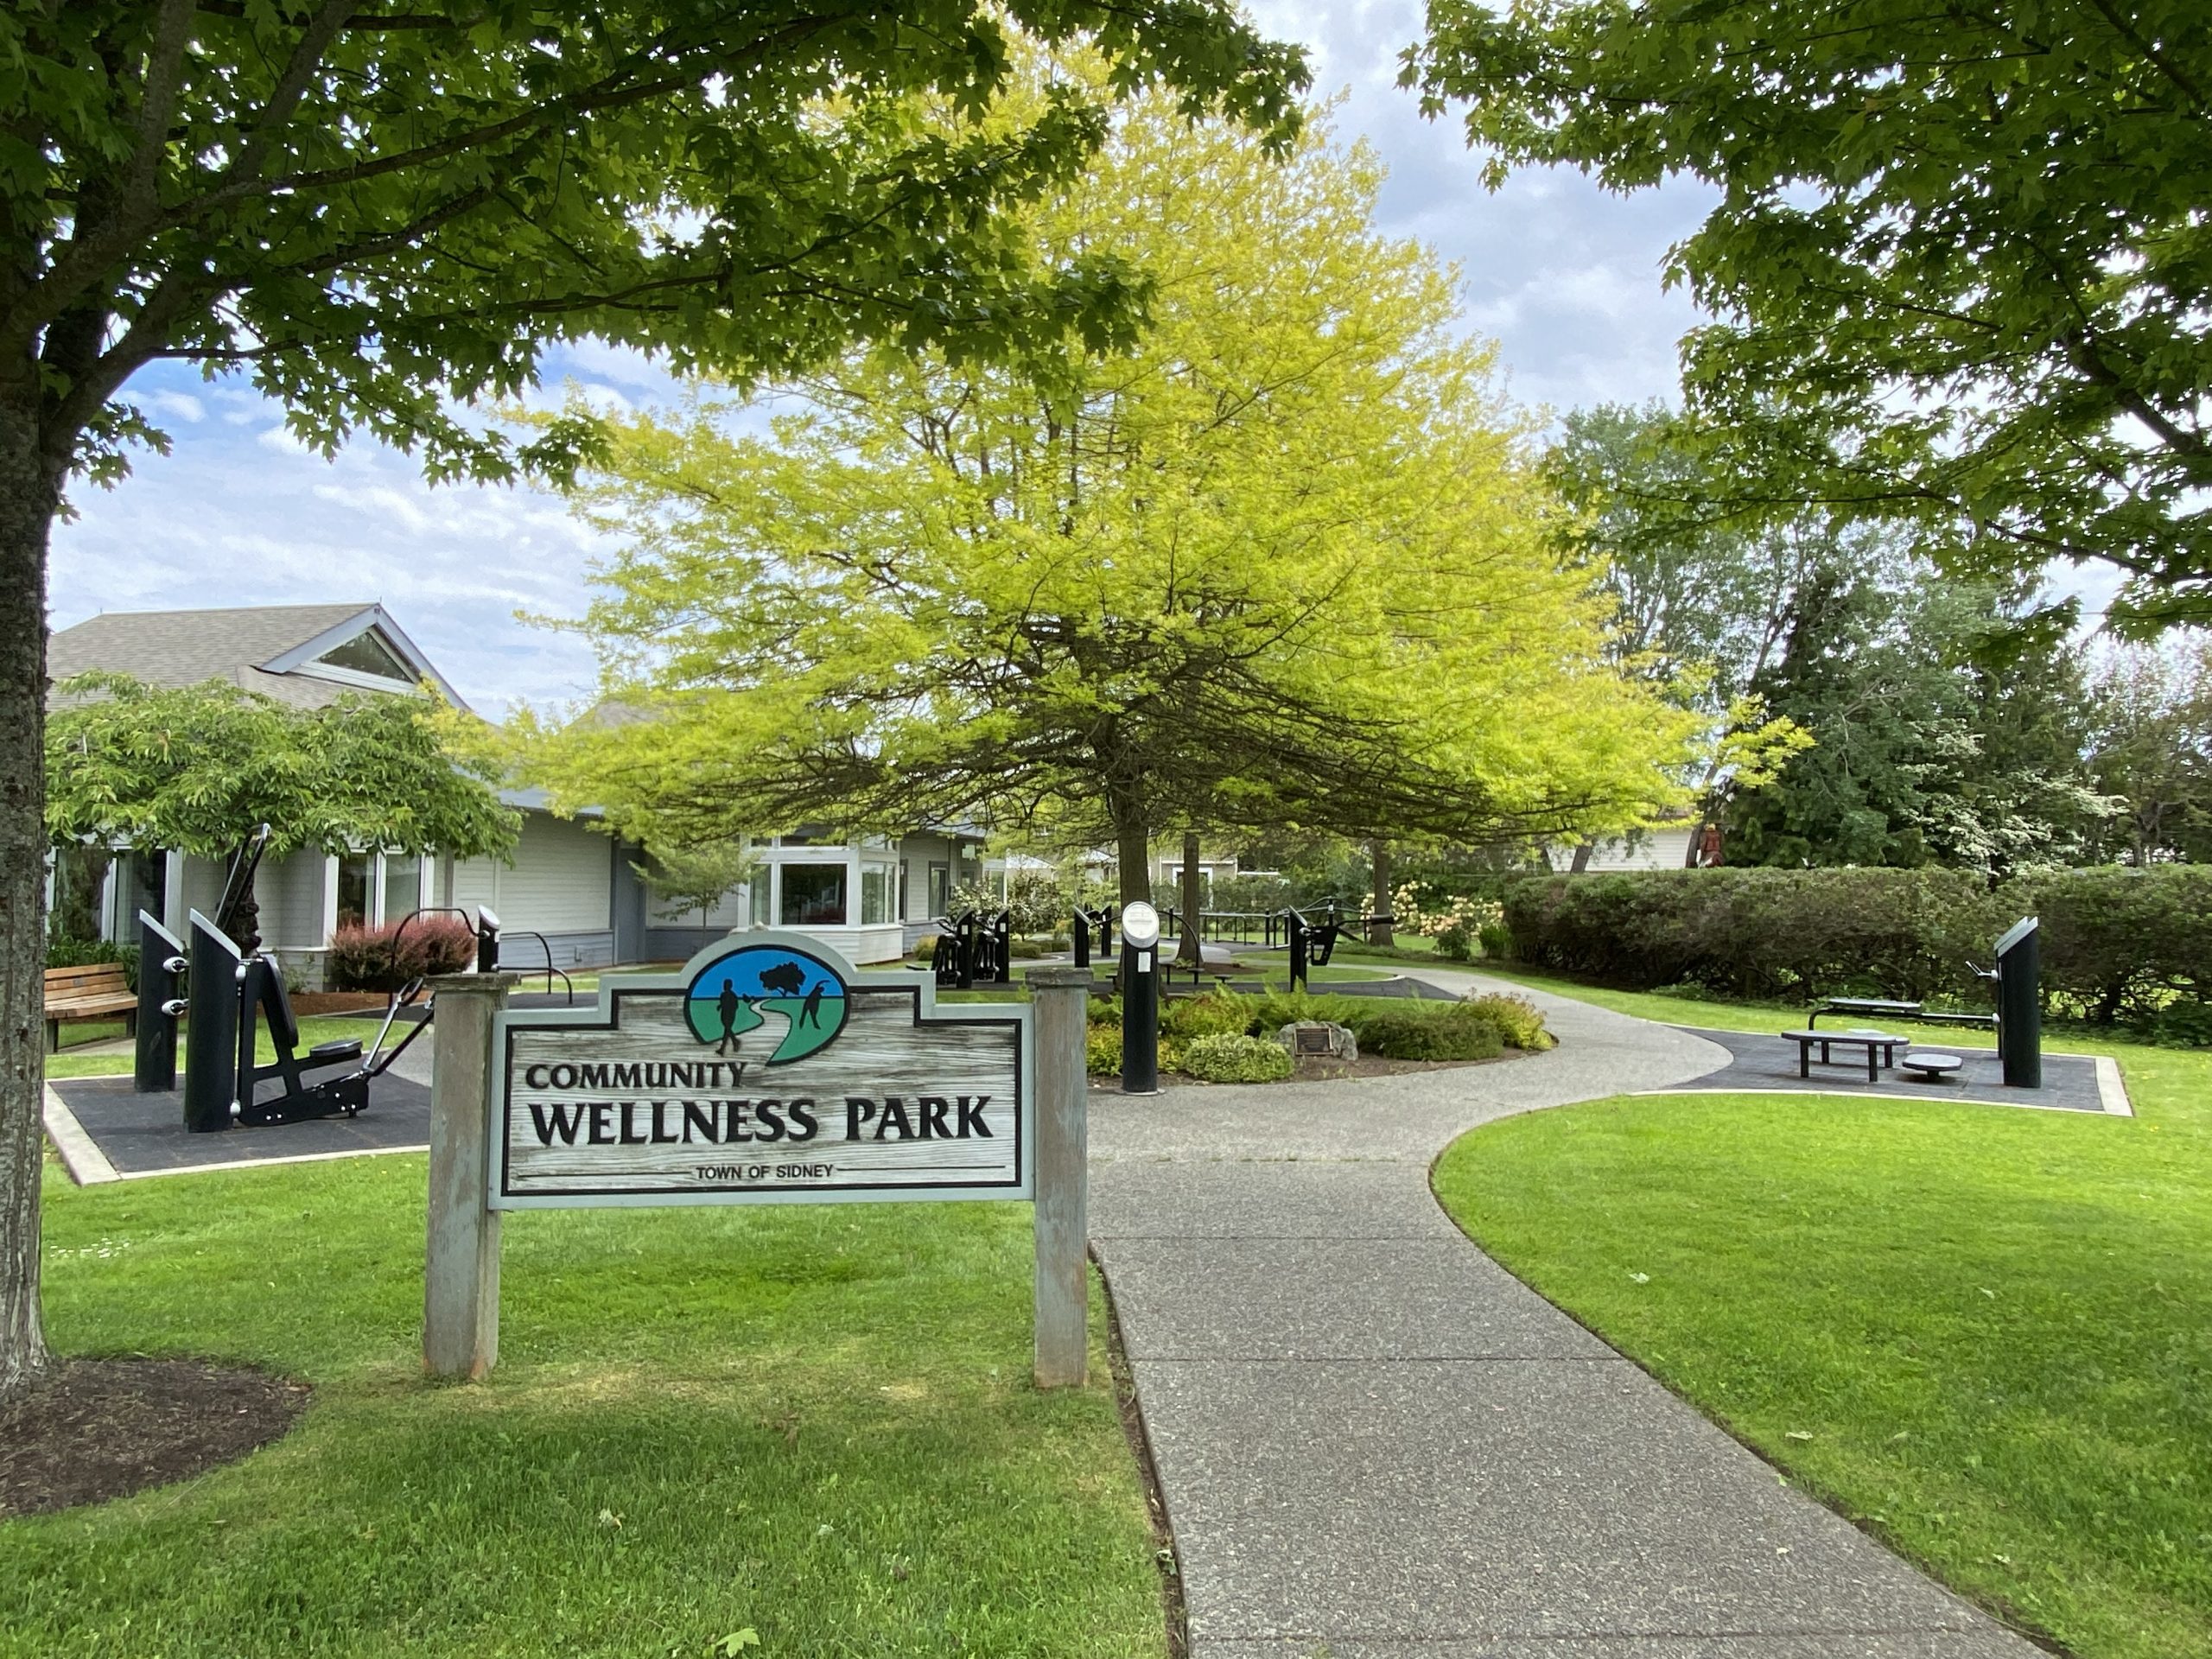 Image of Community Wellness Park with a park name sign, sidewalk, and leafy trees in the foreground and a variety of exercise equipment in the background